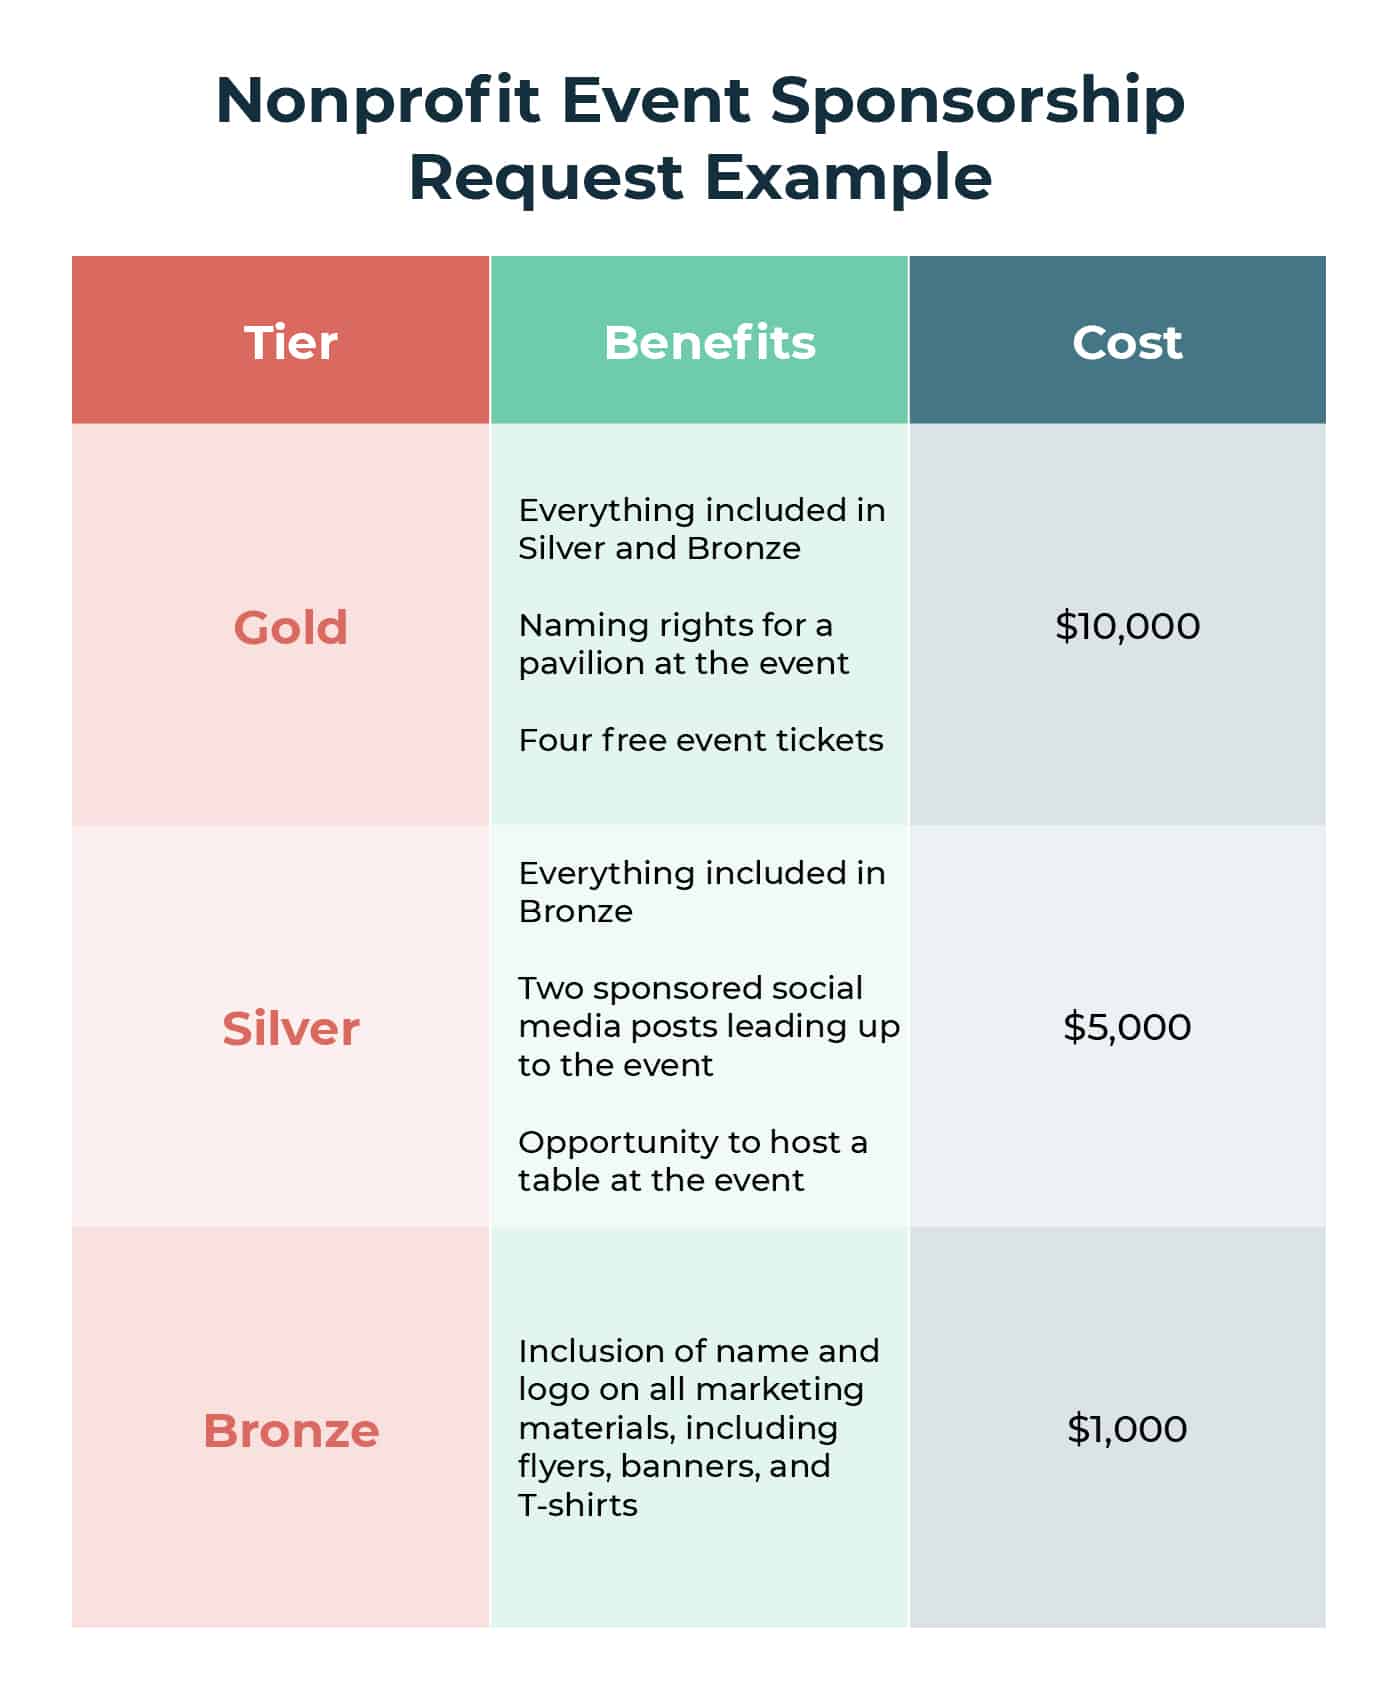 Example sponsorship letter for a nonprofit event, with Gold, Silver, and Bronze tiers